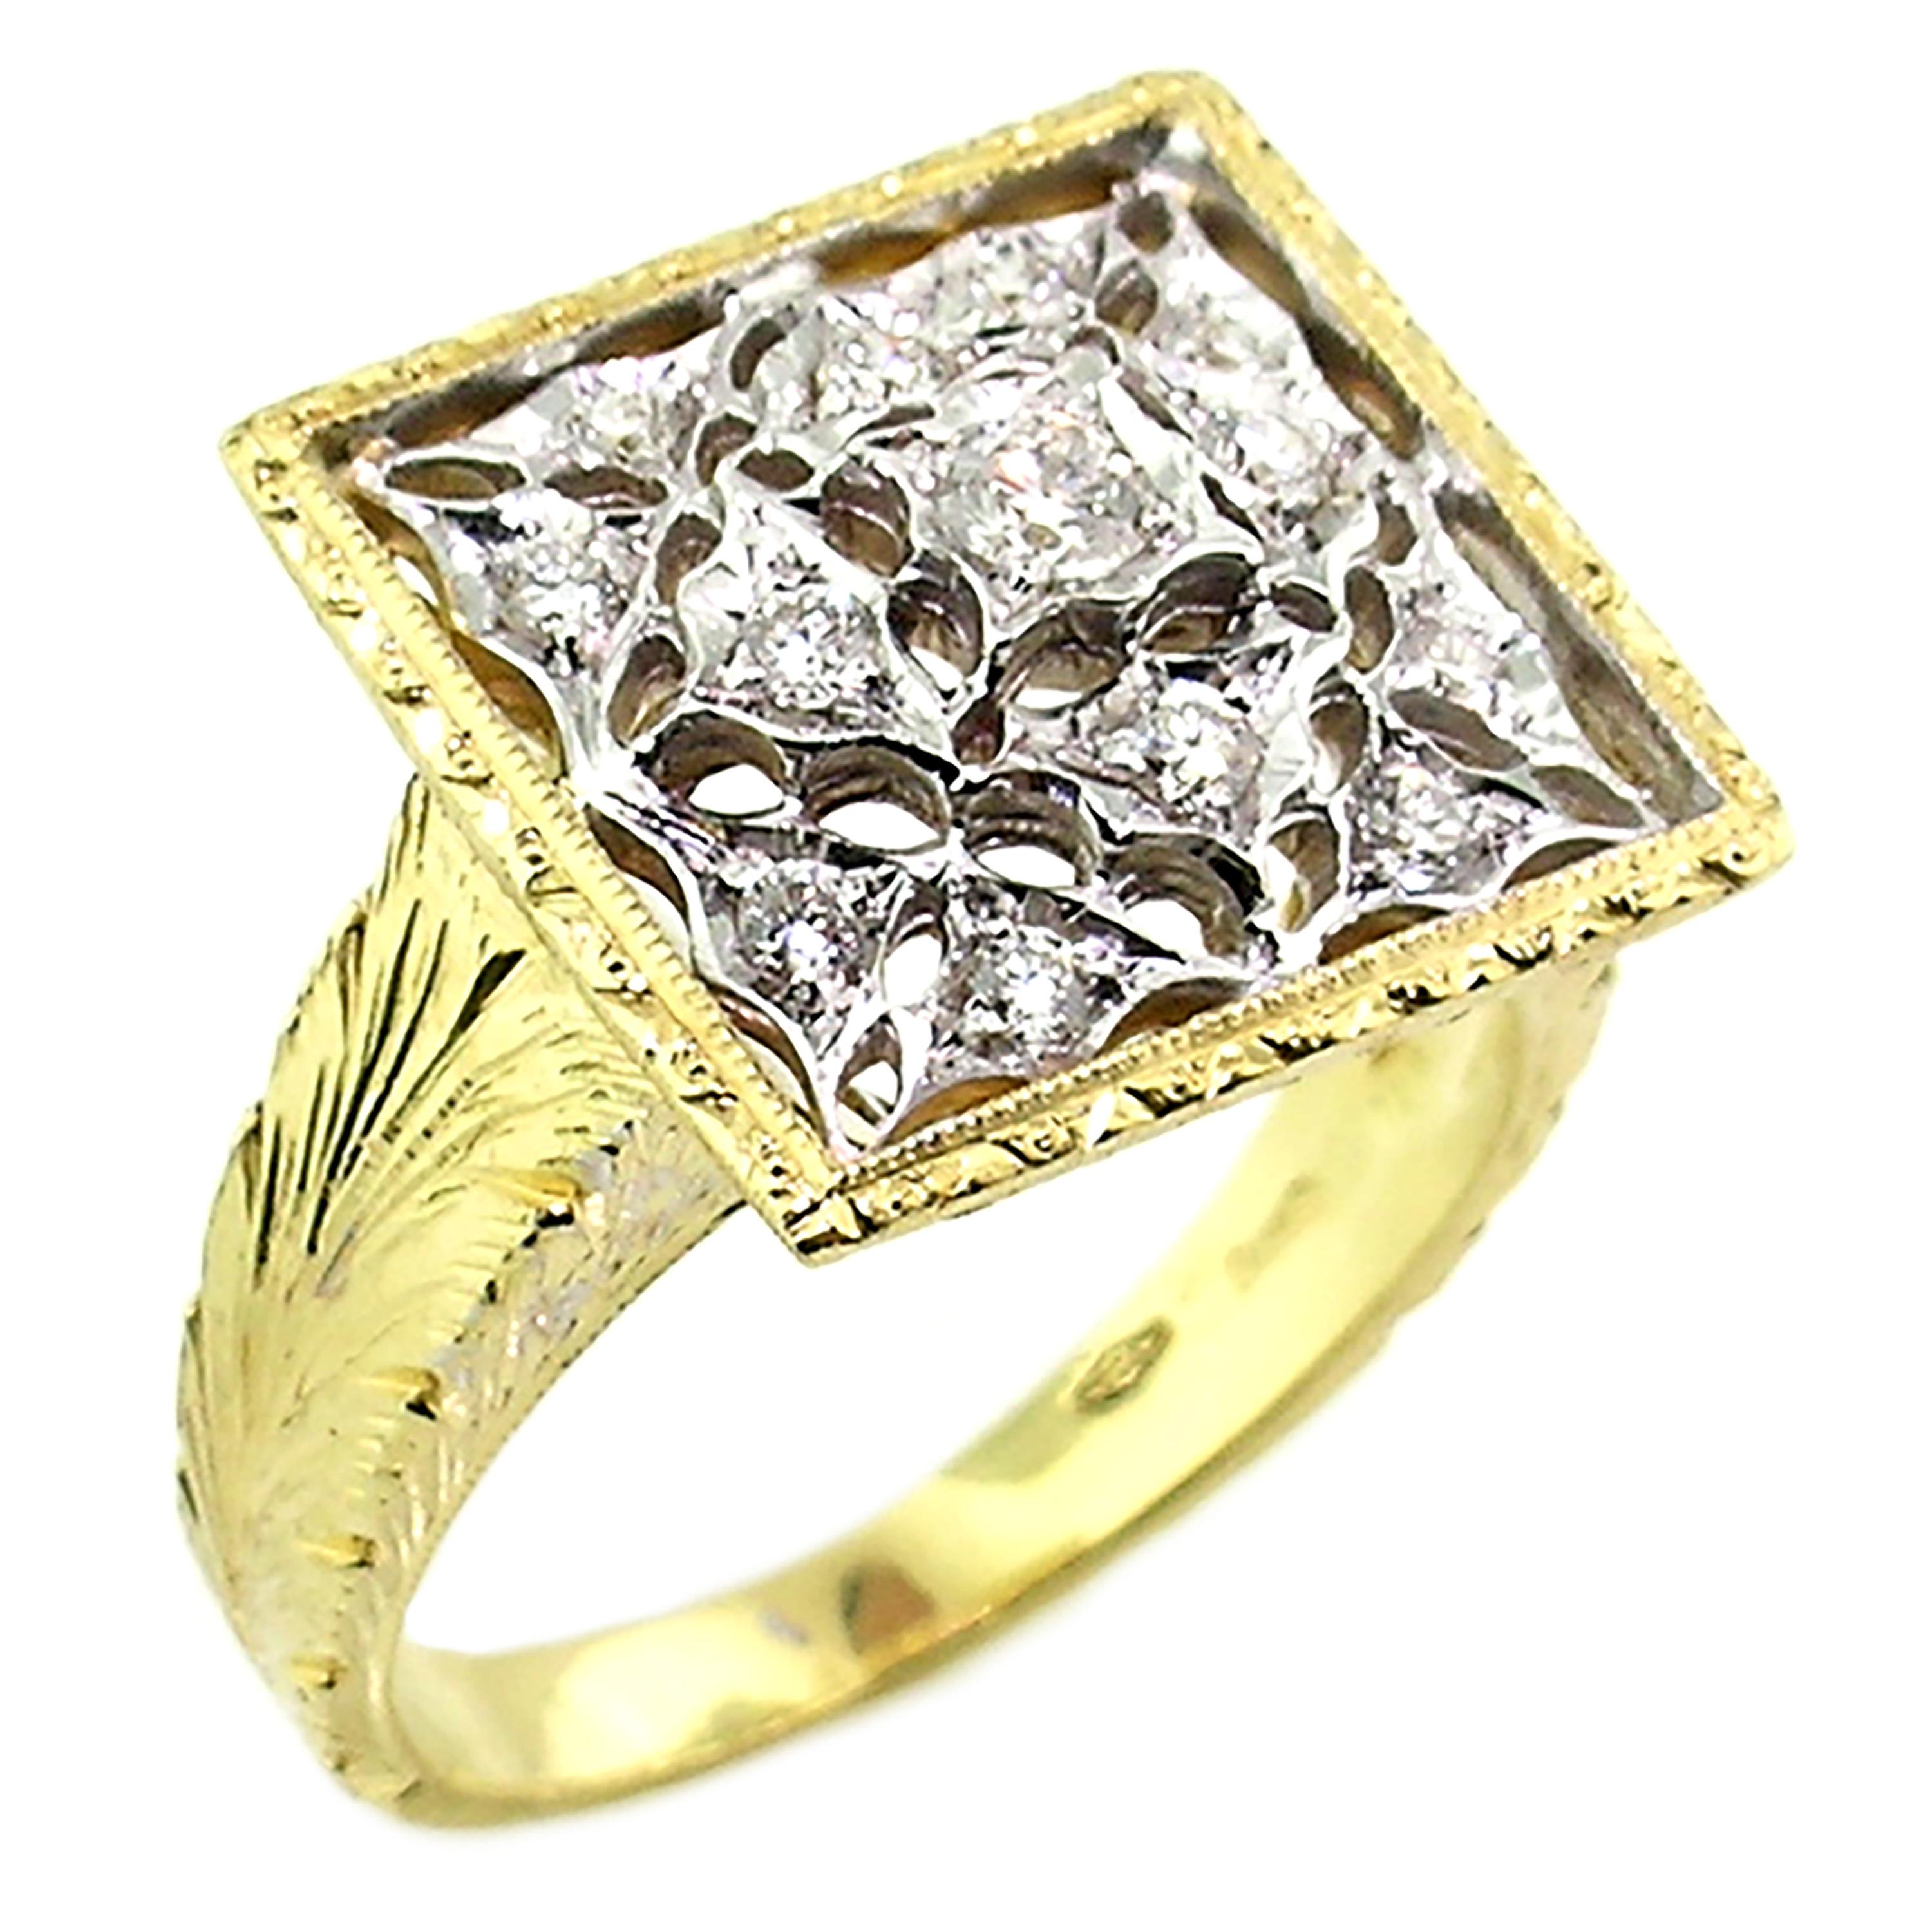 18kt Gold Lace and Diamond Hand Engraved Ring, Handmade in Florence, Italy